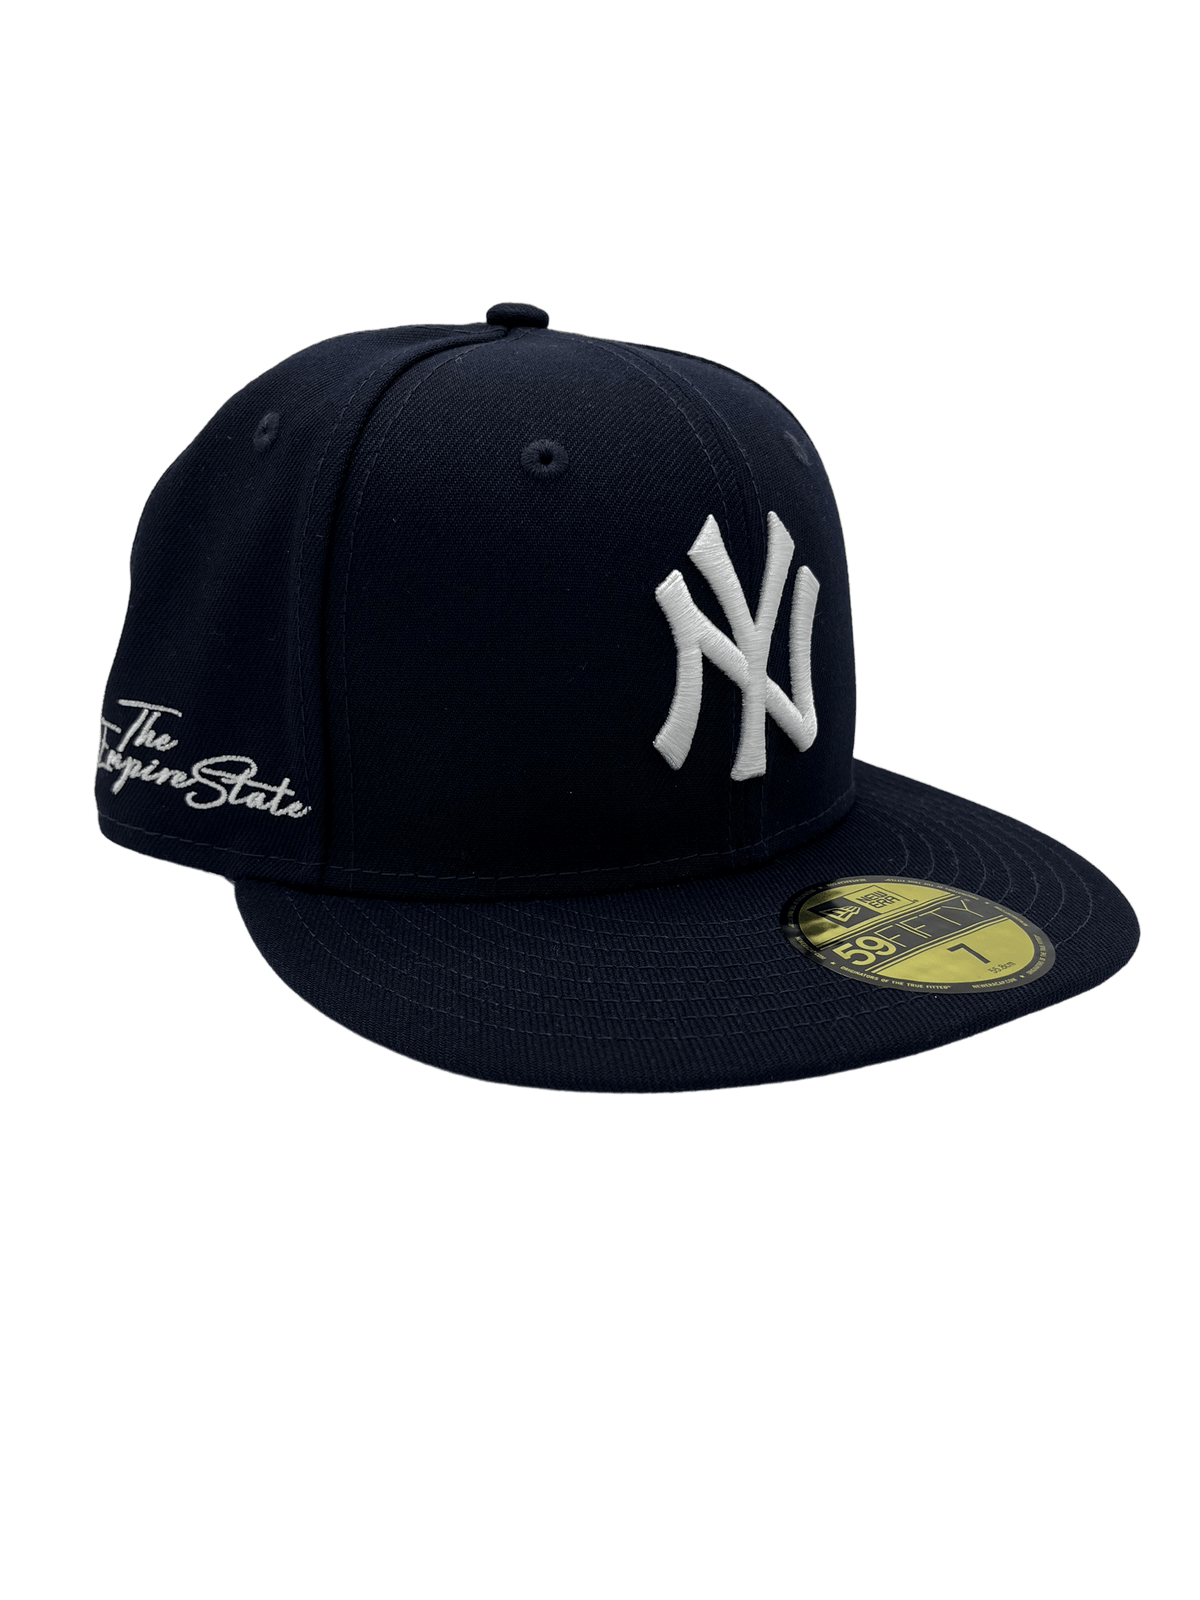 NJ Script New Era 59FIFTY Fitted Hat (Navy Red Gray Under BRIM) 7 3/8